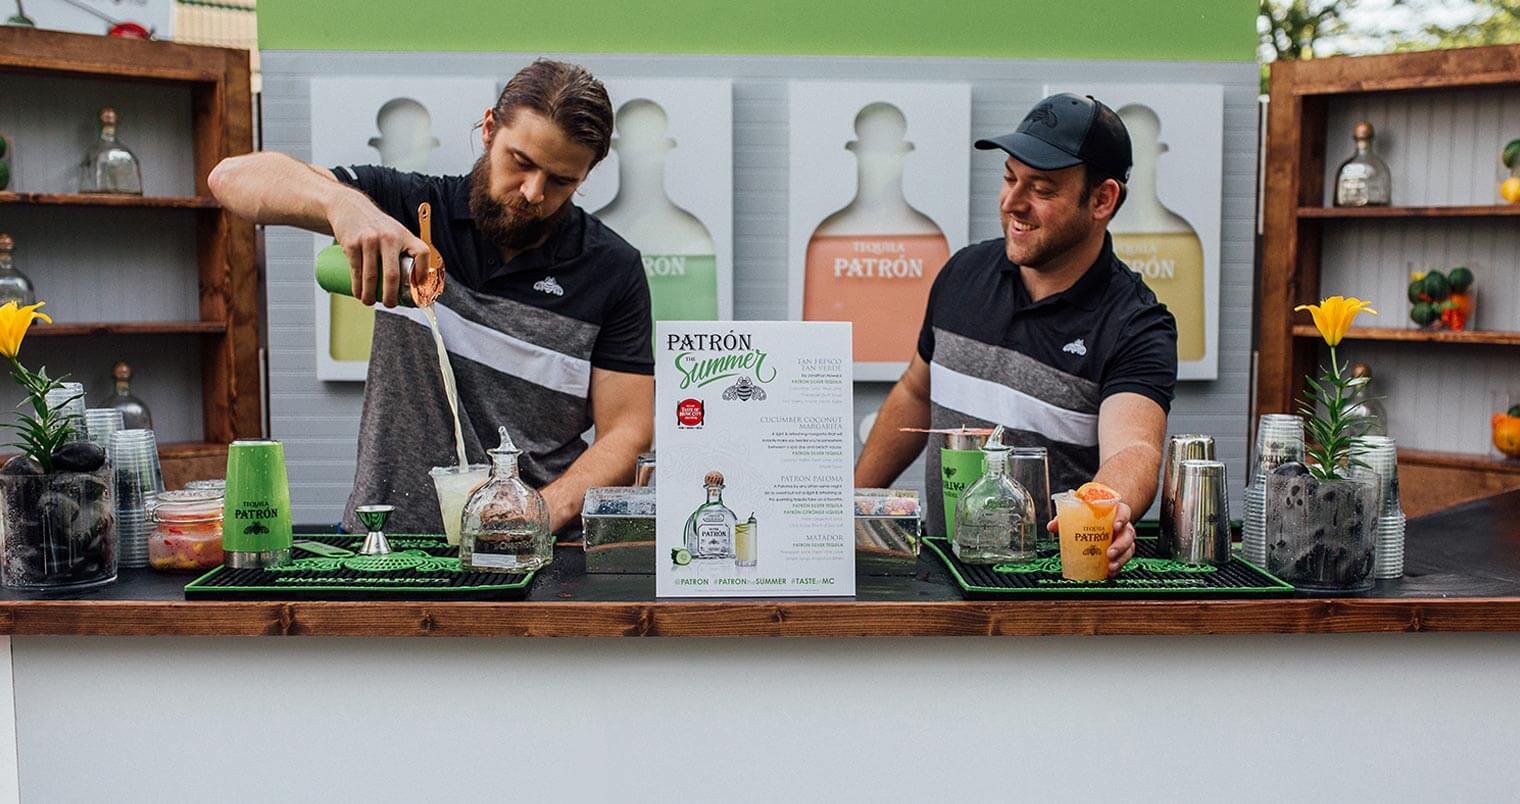 Patrón Tequila Inspires Consumers to 'Patrón the Summer', featured image